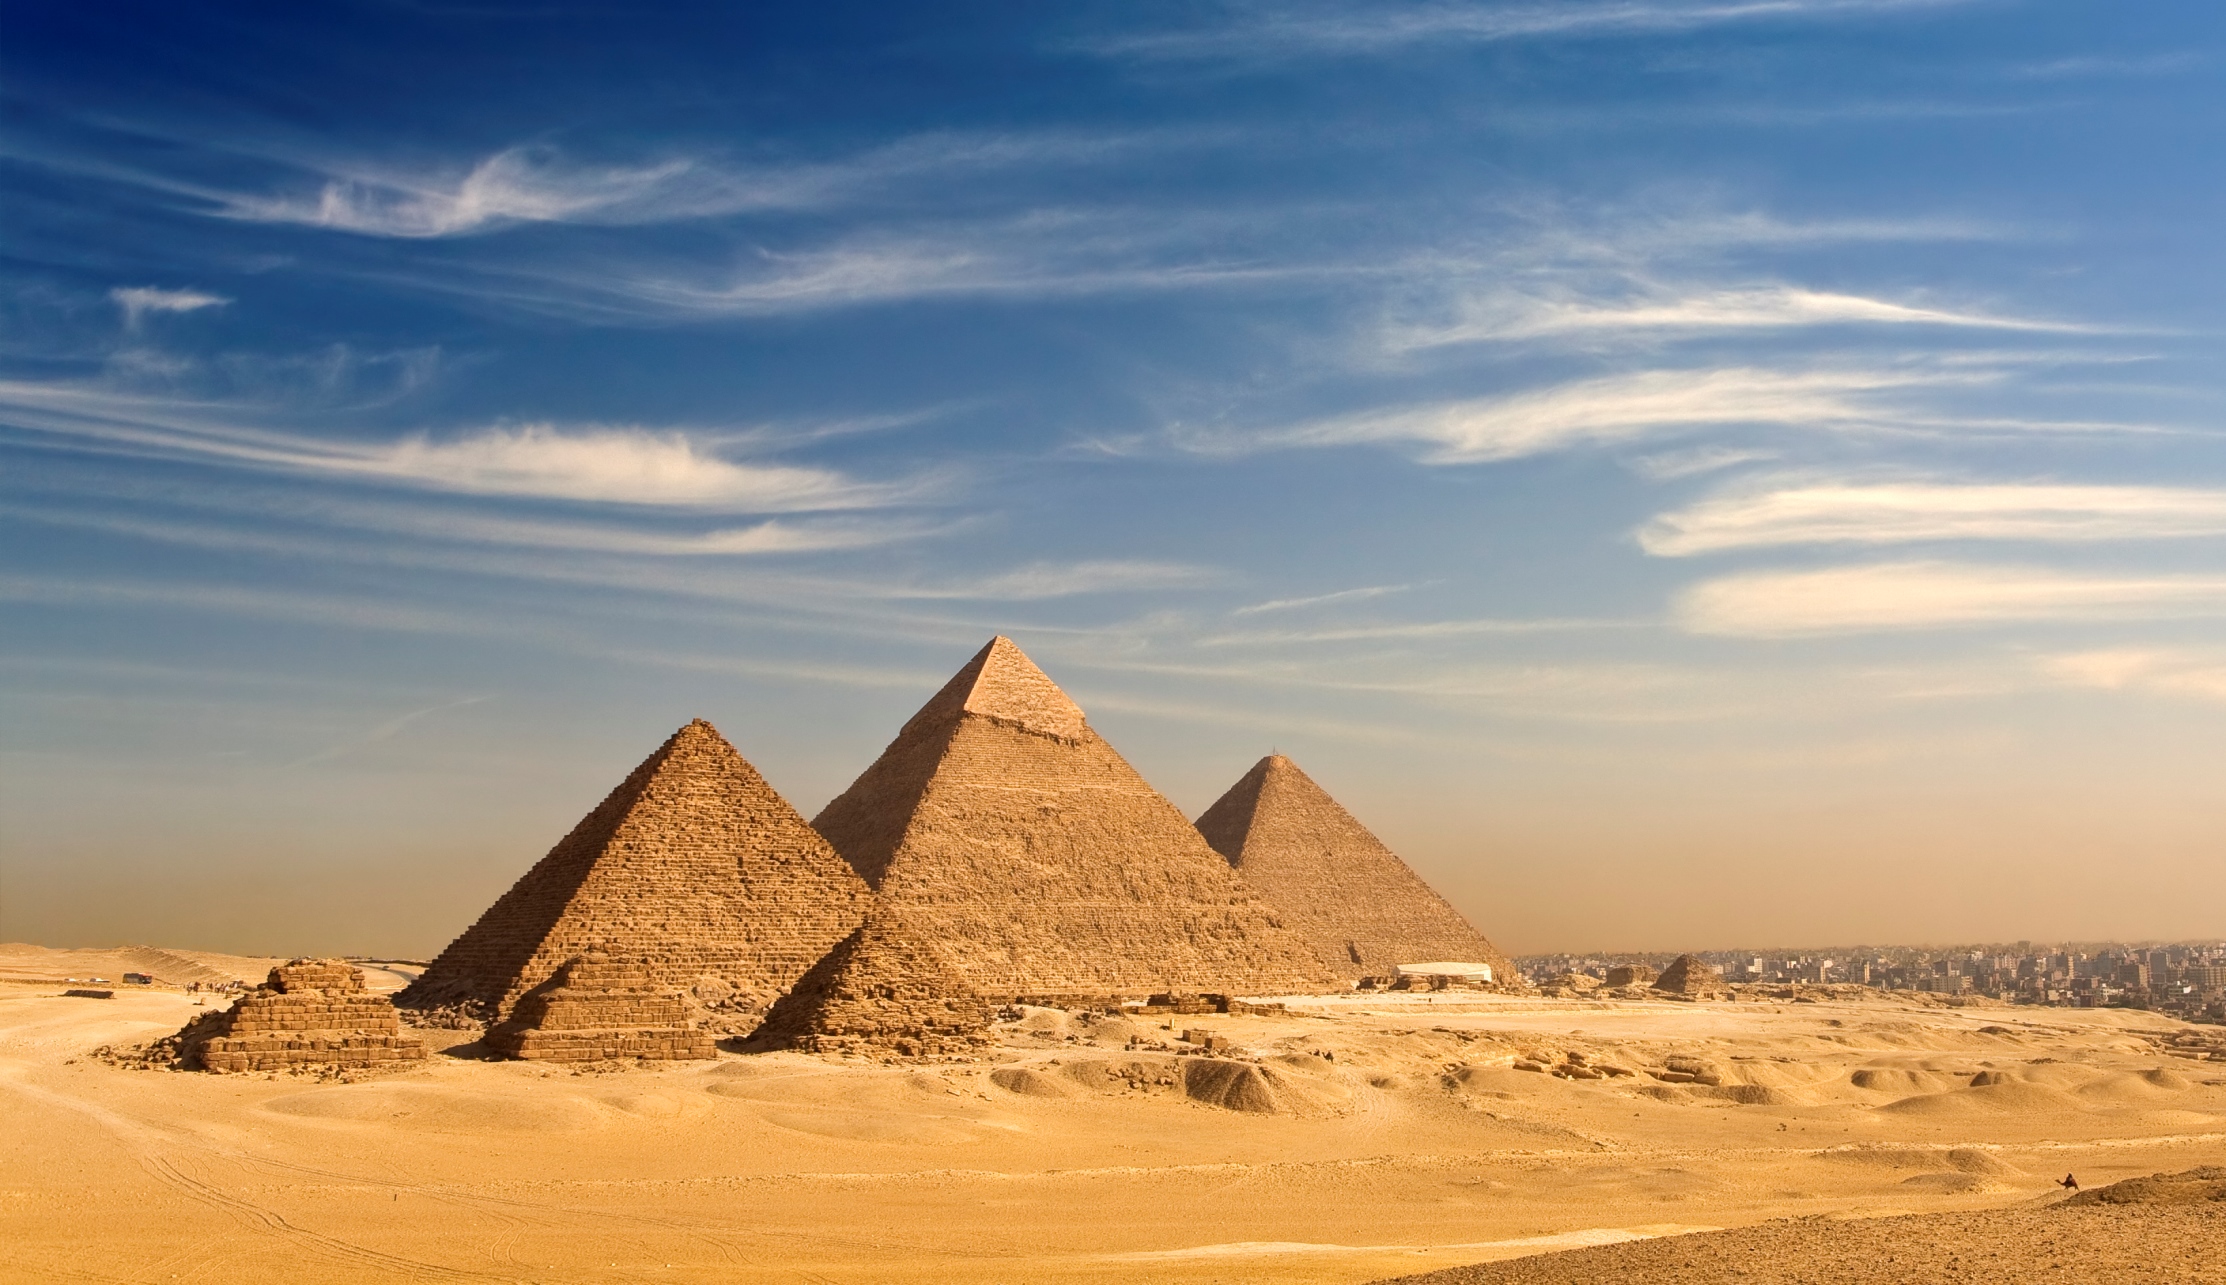 Great Pyramids of Giza, Cairo in Egypt